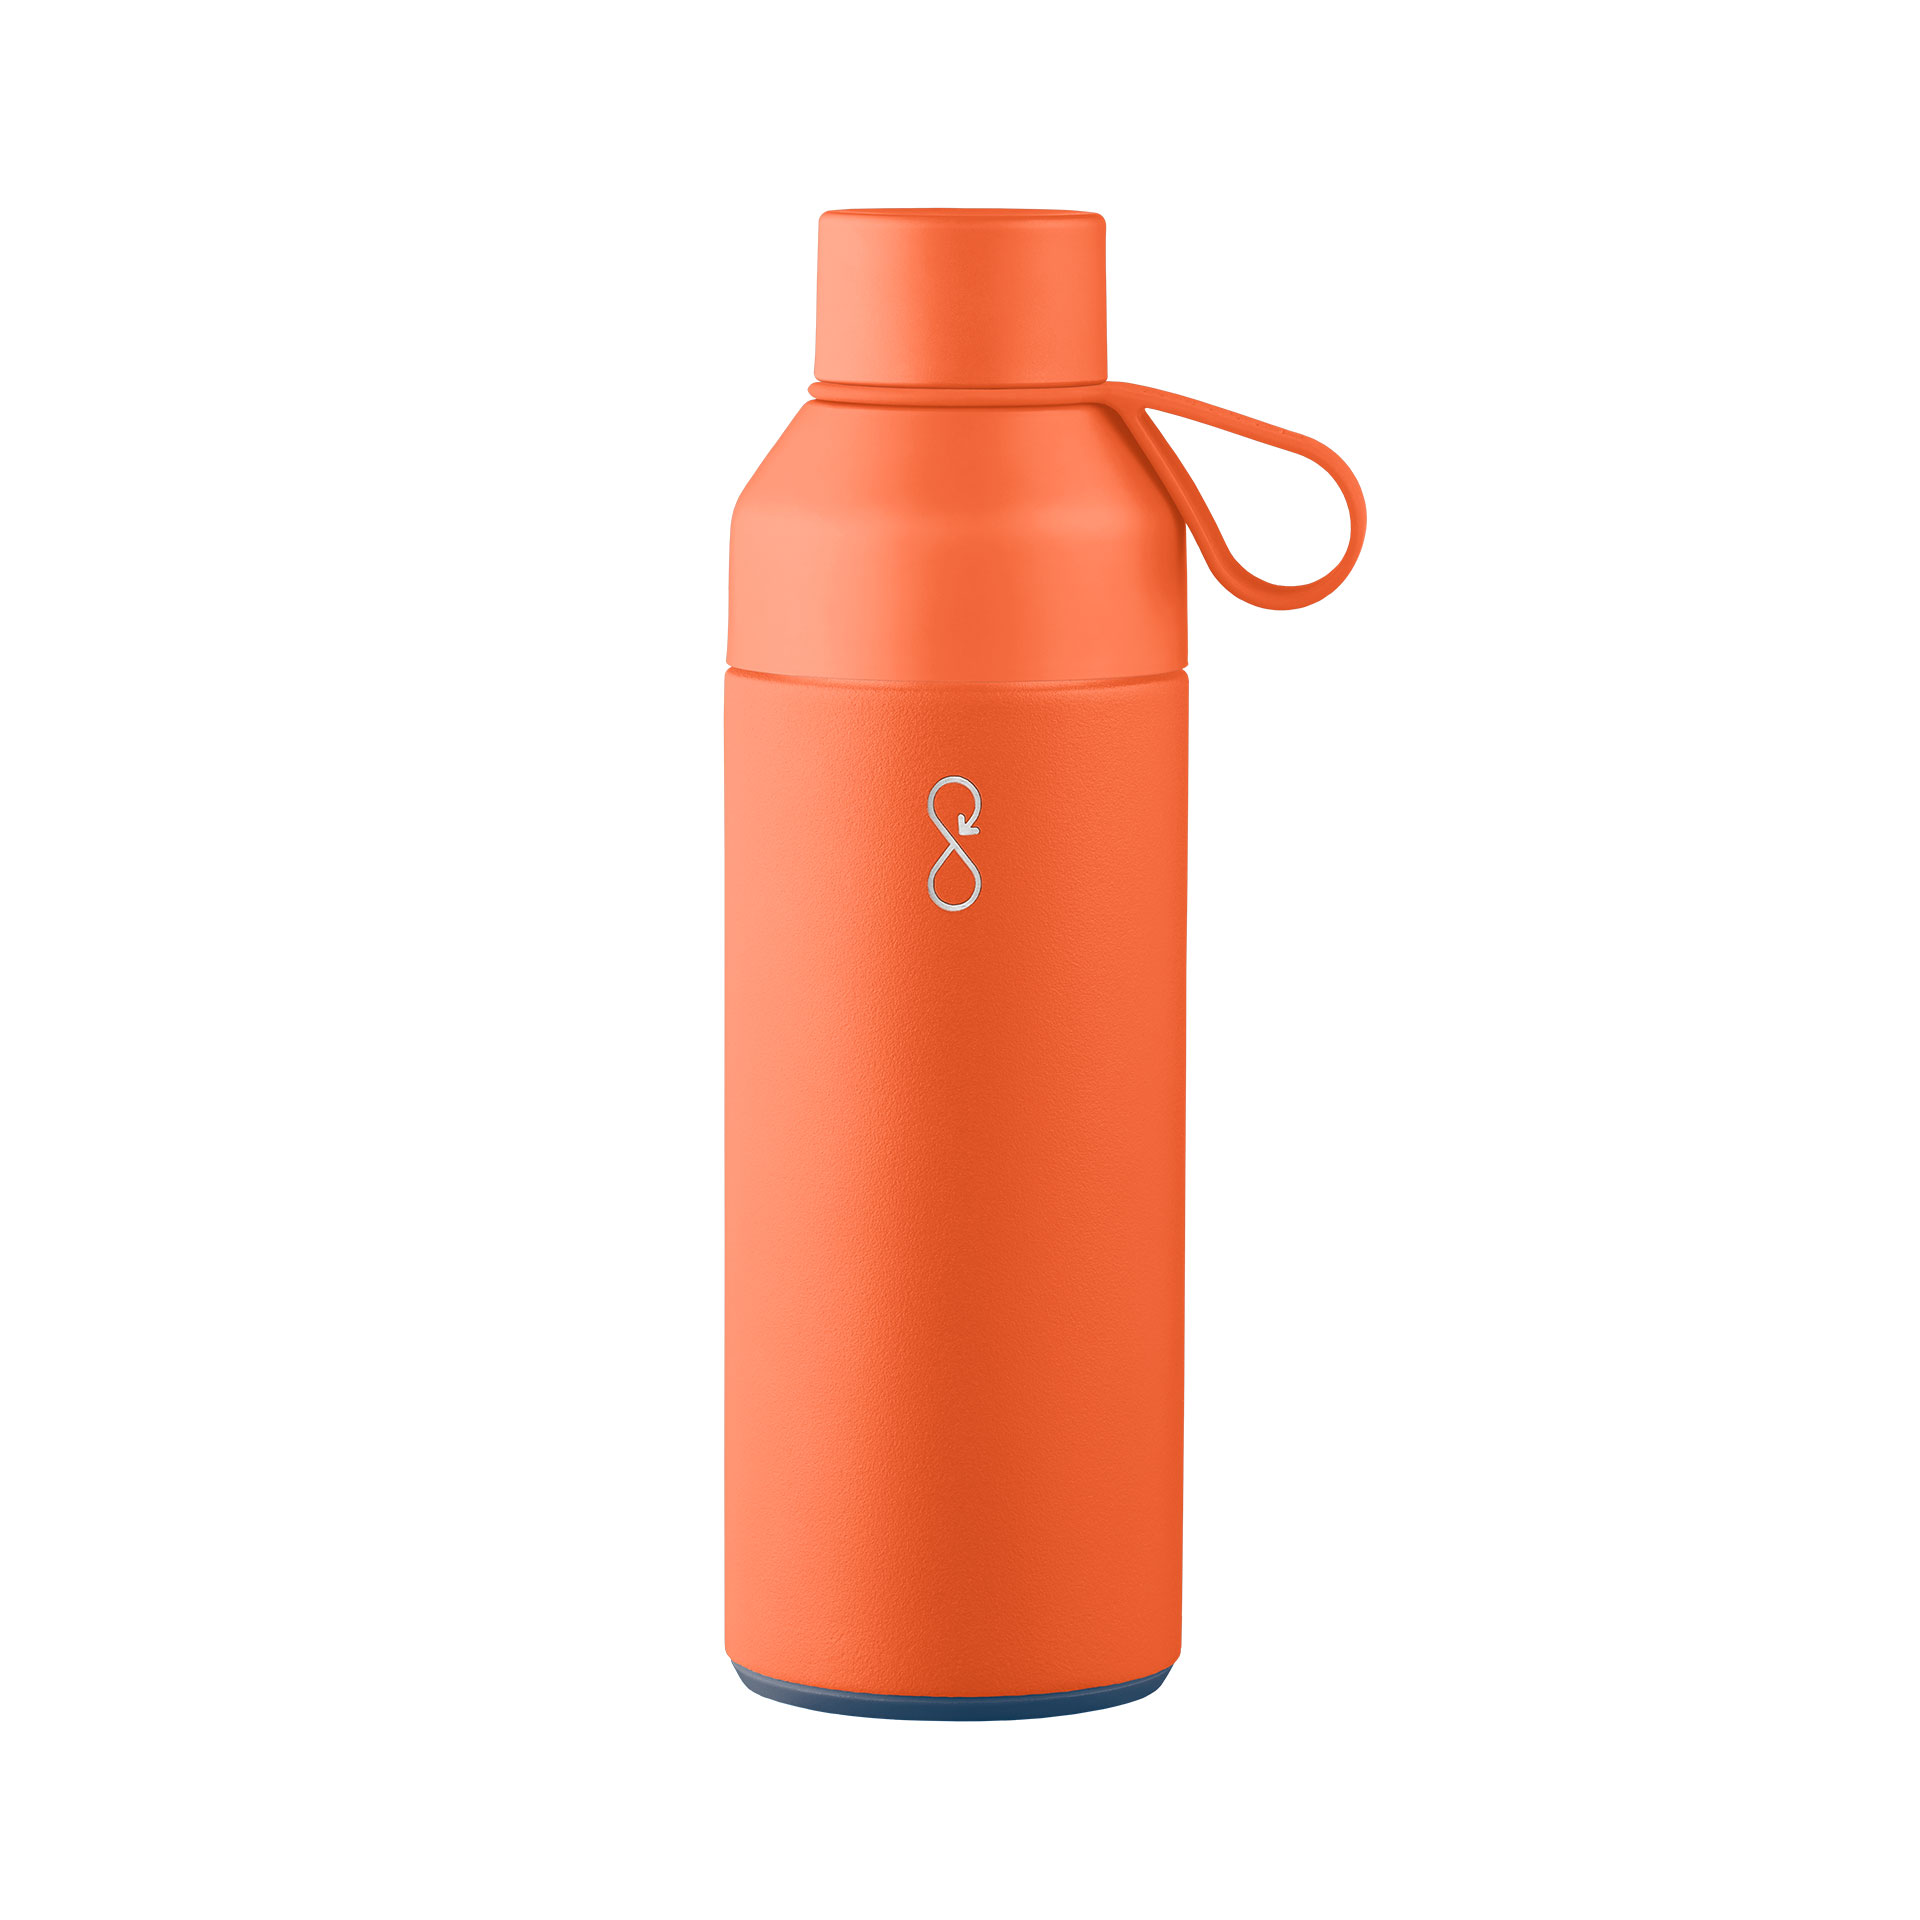 The Ocean Bottle is made from part recycled plastic and stainless steel. Each bottle funds the collection of 11.4kg of plastic, equivalent to 1000 plastic bottles. Plastic Bank ensures that the plastic waste is collected by locals living in coastal communities, mostly in Asia. This bottle is vacuum thermos insulated, this means it keeps cold drinks cold and hot drinks hot. It comes with an easy carry silicone loop, double opening for easy drink and a clean drinking cup. Dishwasher safe. 500ml capacity. Orange